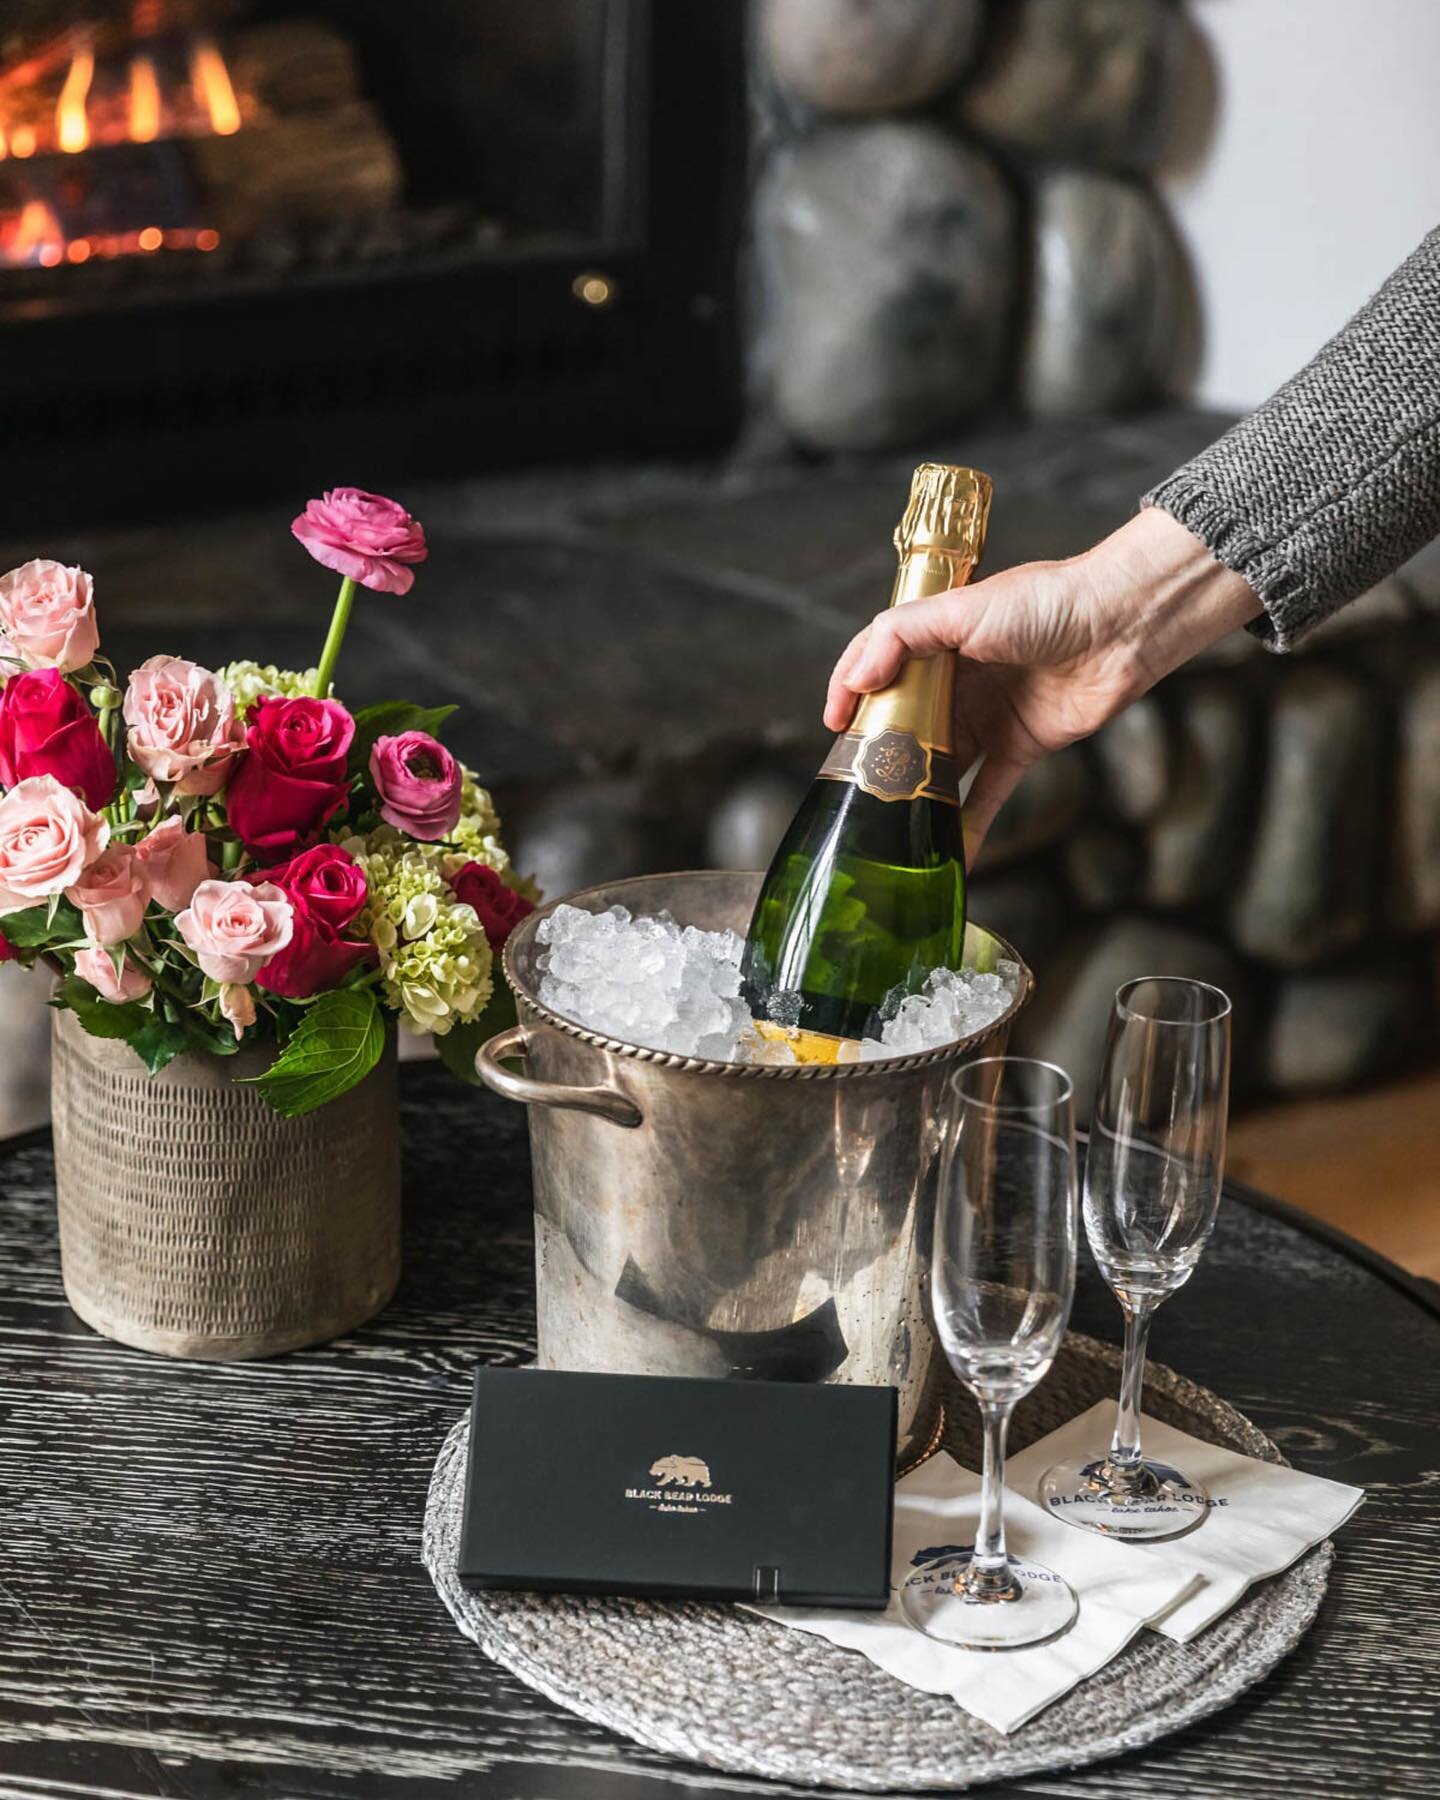 Add on one of our enhancements when checking out and treat yourself (or a friend!) to a welcome package on arrival to your room. 

Works particularly well as a Mother&rsquo;s Day gift too 🤍
.
.
📷 @muse_group